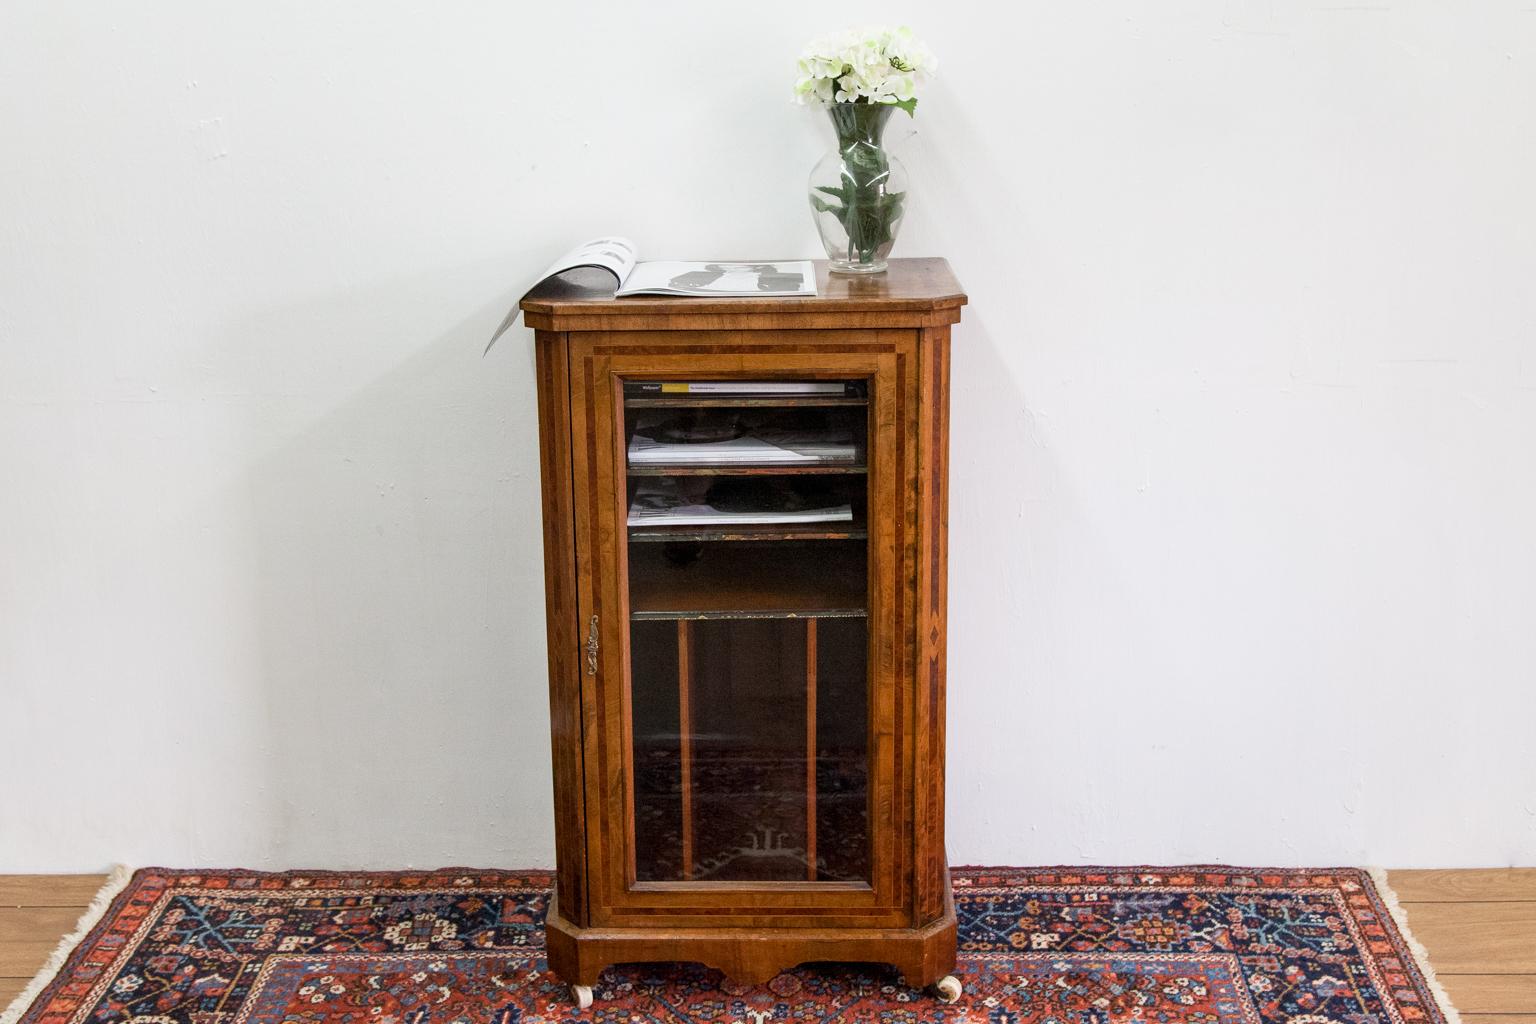 Burl walnut glass door cabinet, the top is crossbanded with bird's-eye maple and boxwood with a beveled top edge. The door has chamfered corners, and the sides have the same wood motif as the top. The inside has four horizontal shelves and three